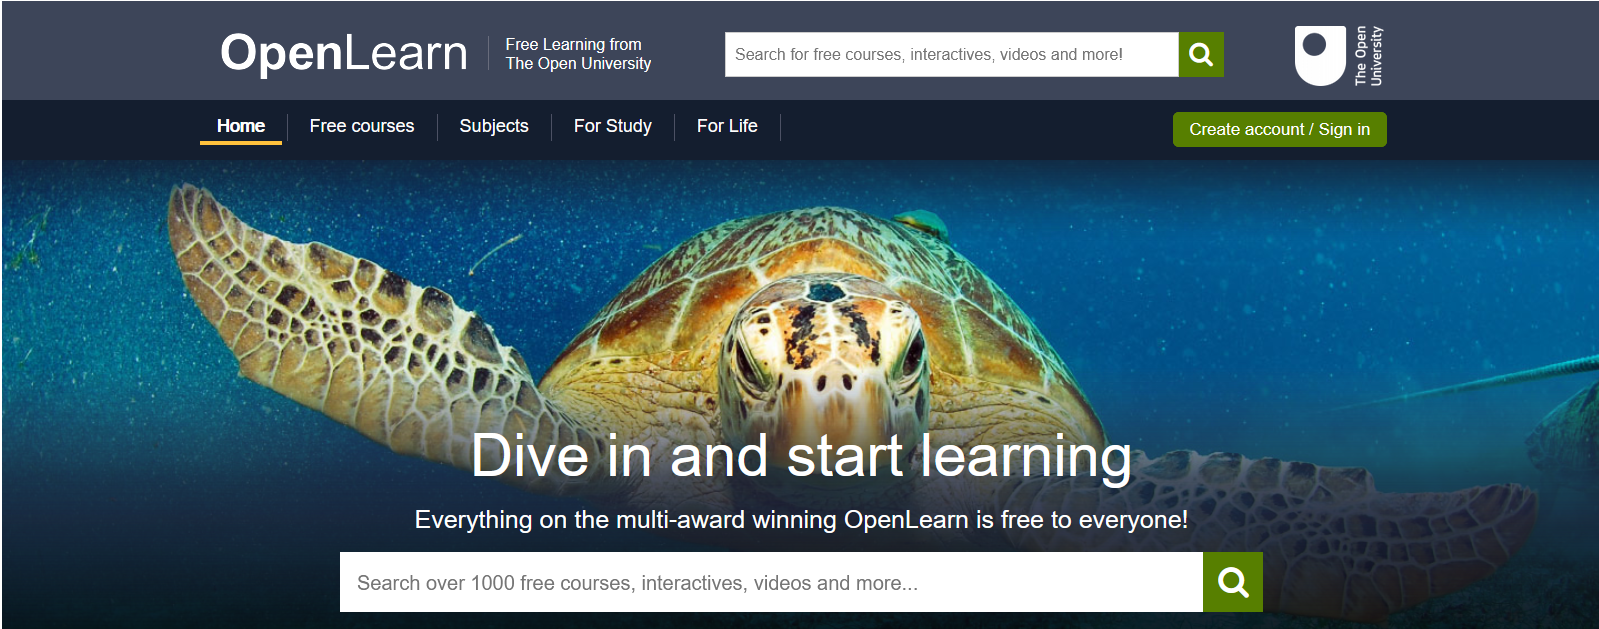 OpenLearn home page